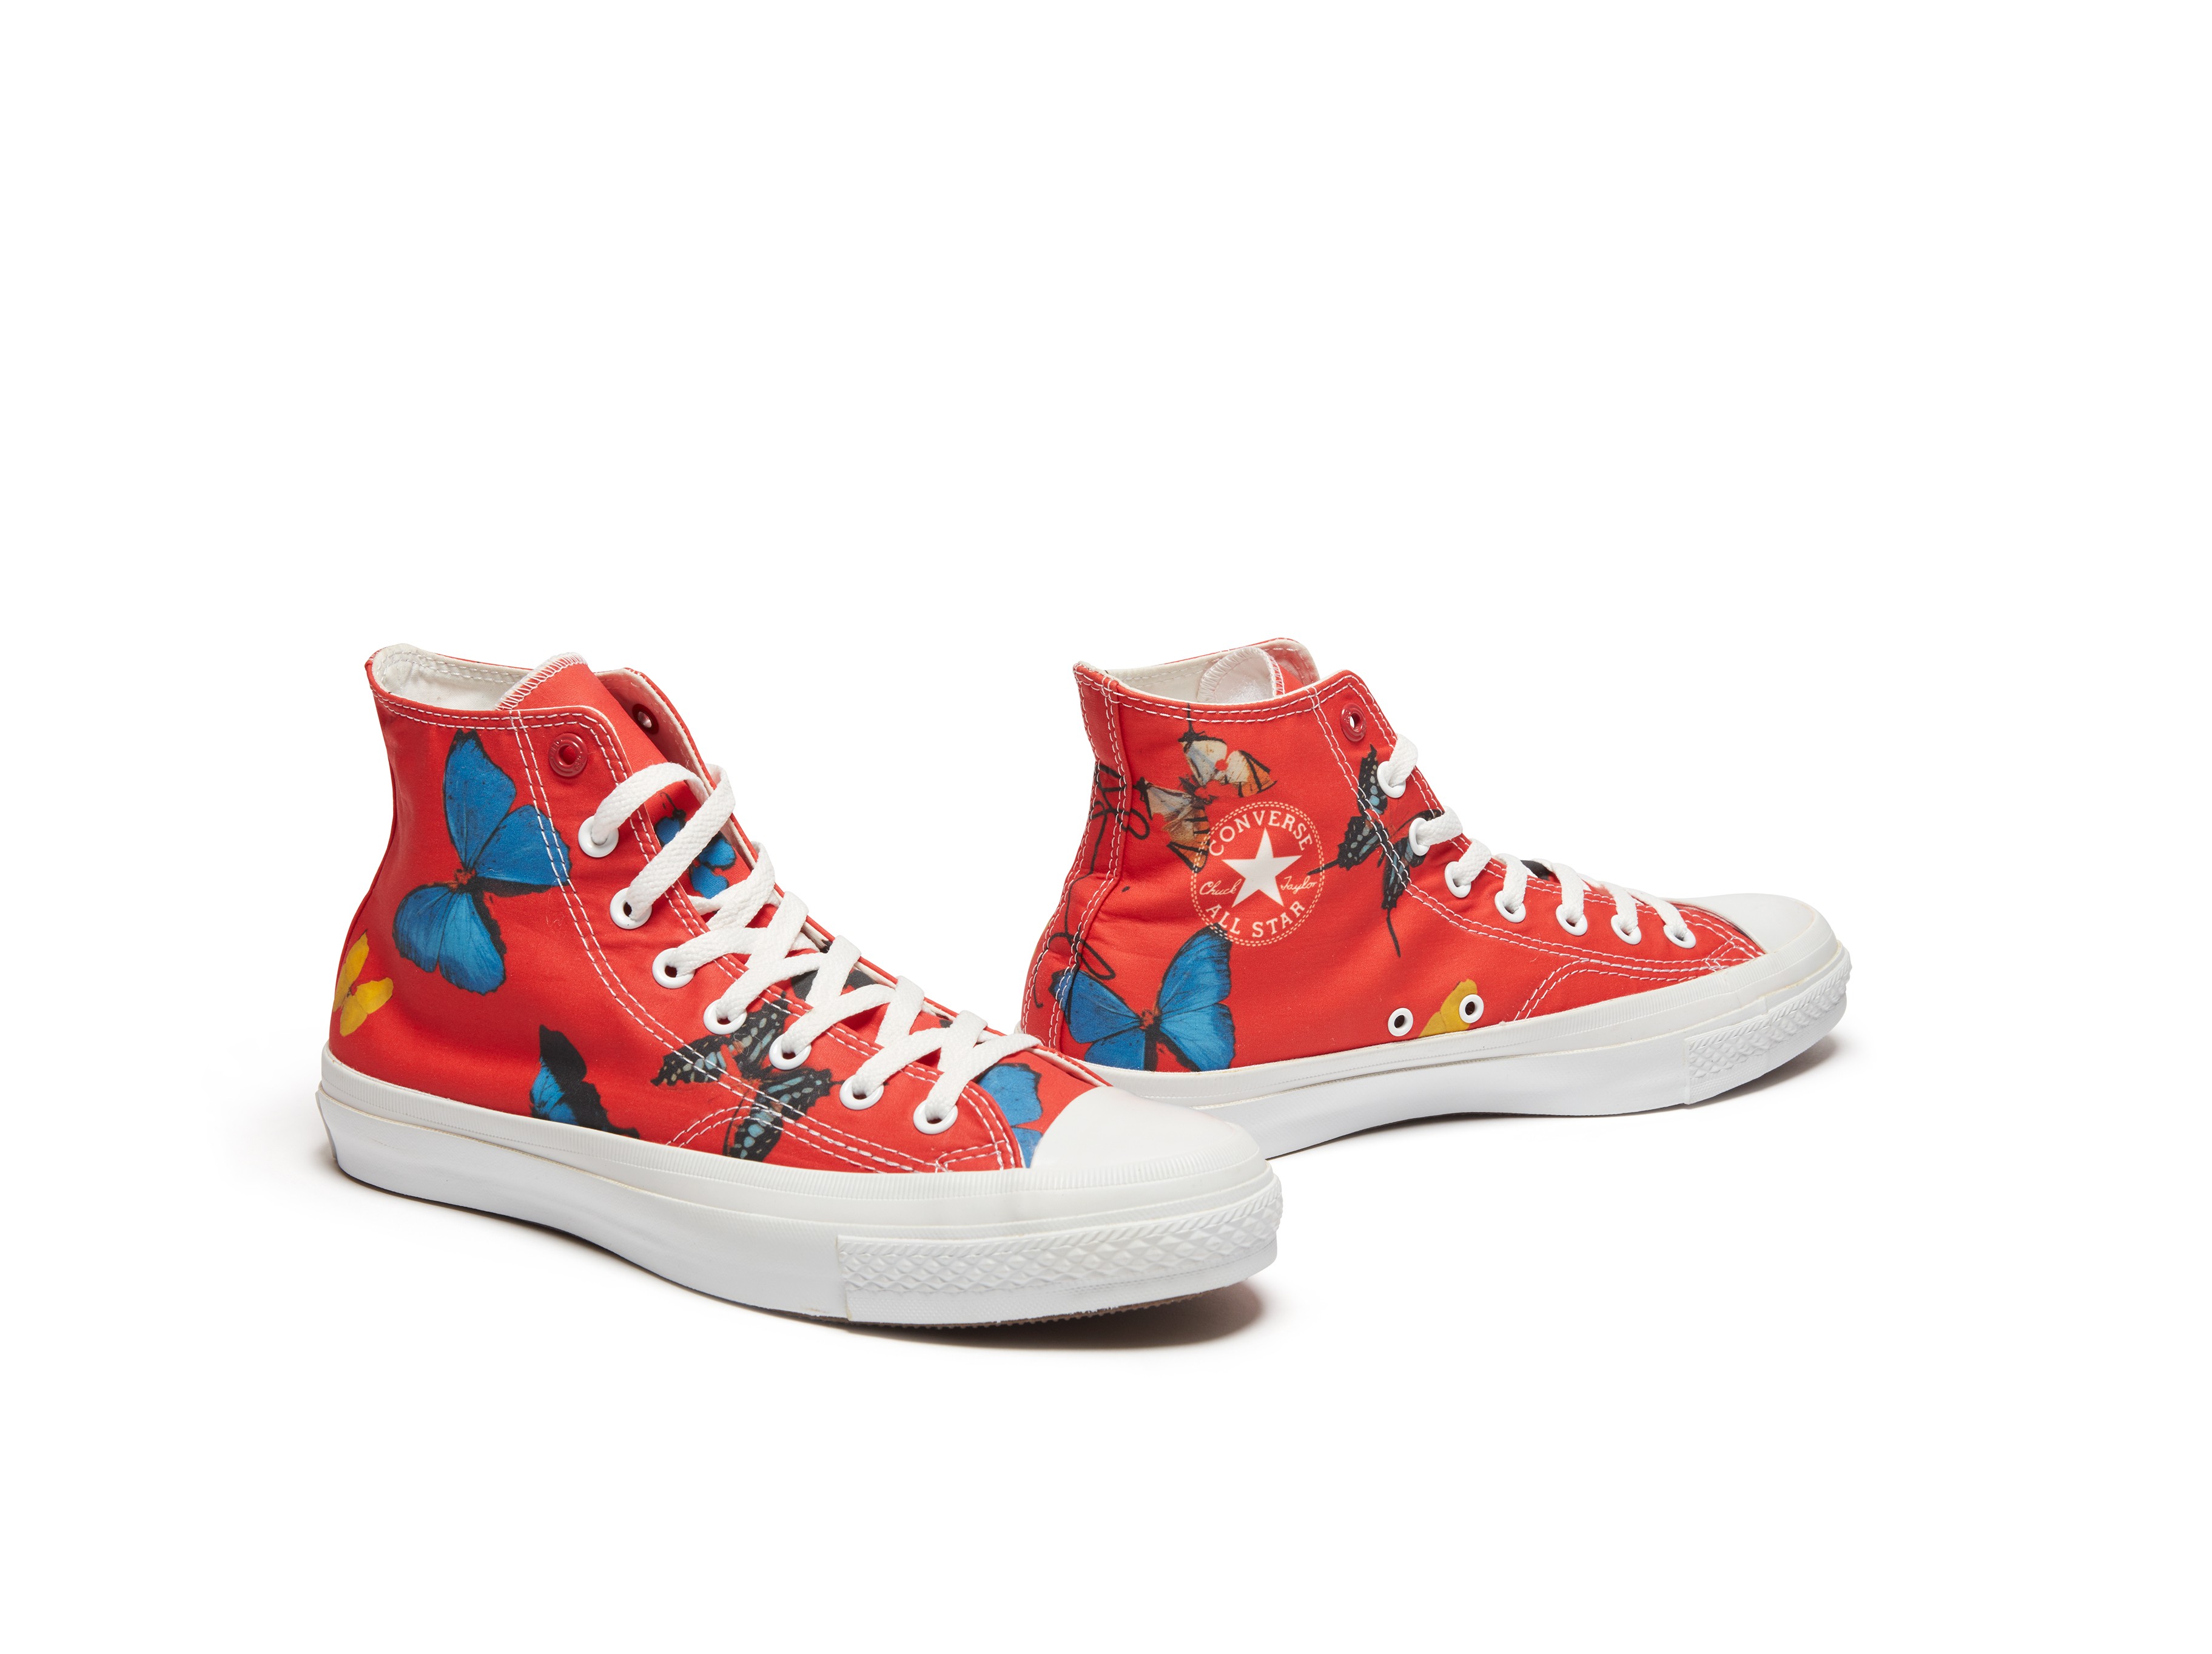 A pair of Converse sneakers designed by artist Damien Hirst.